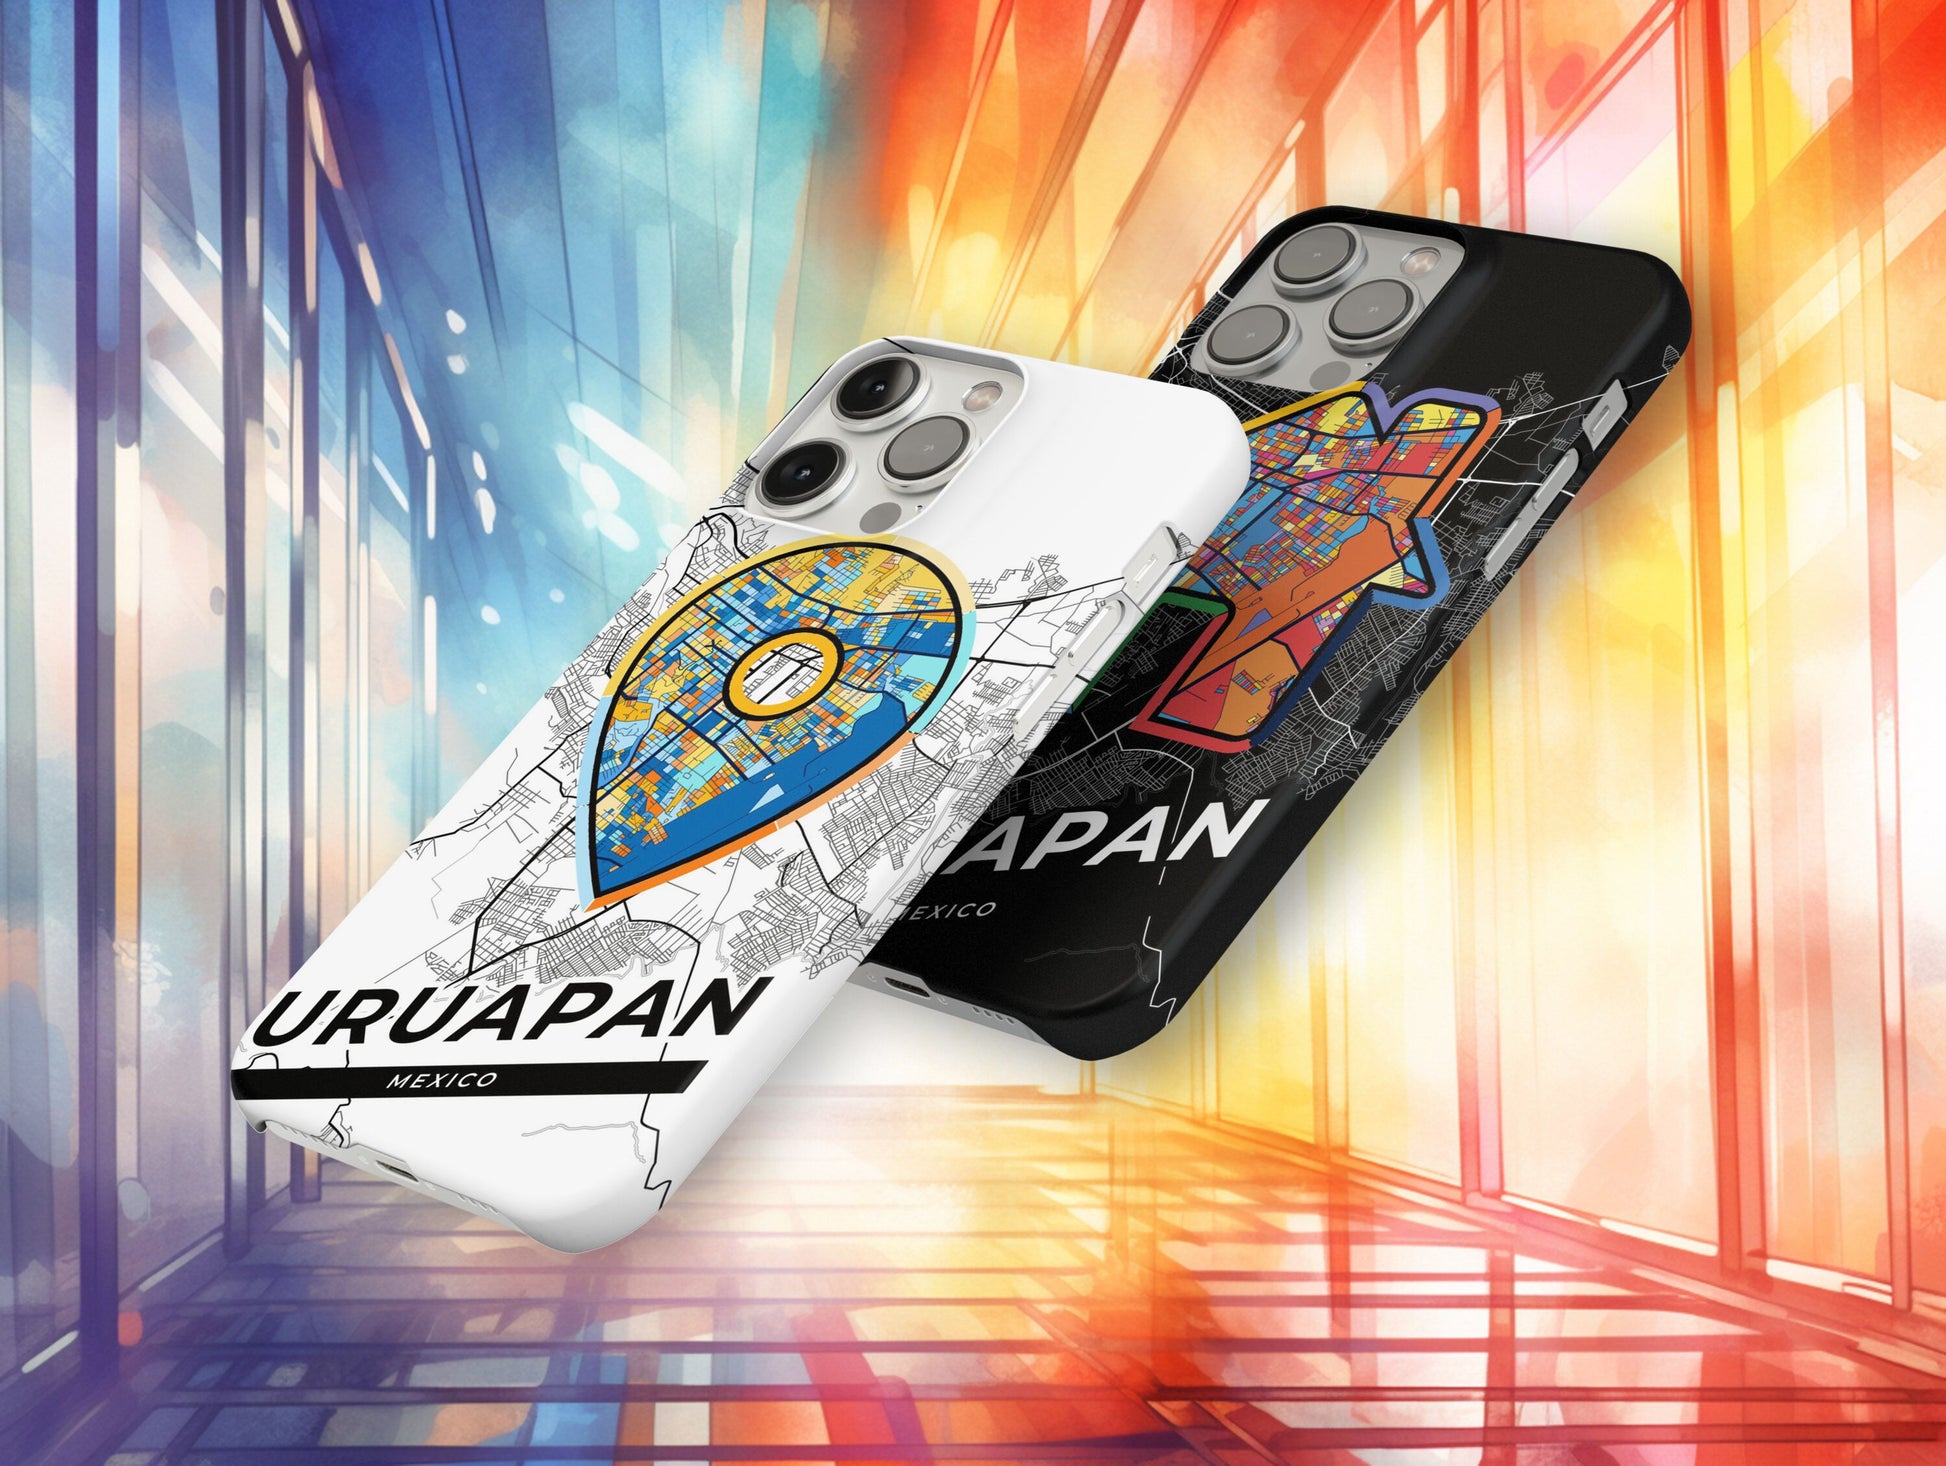 Uruapan Mexico slim phone case with colorful icon